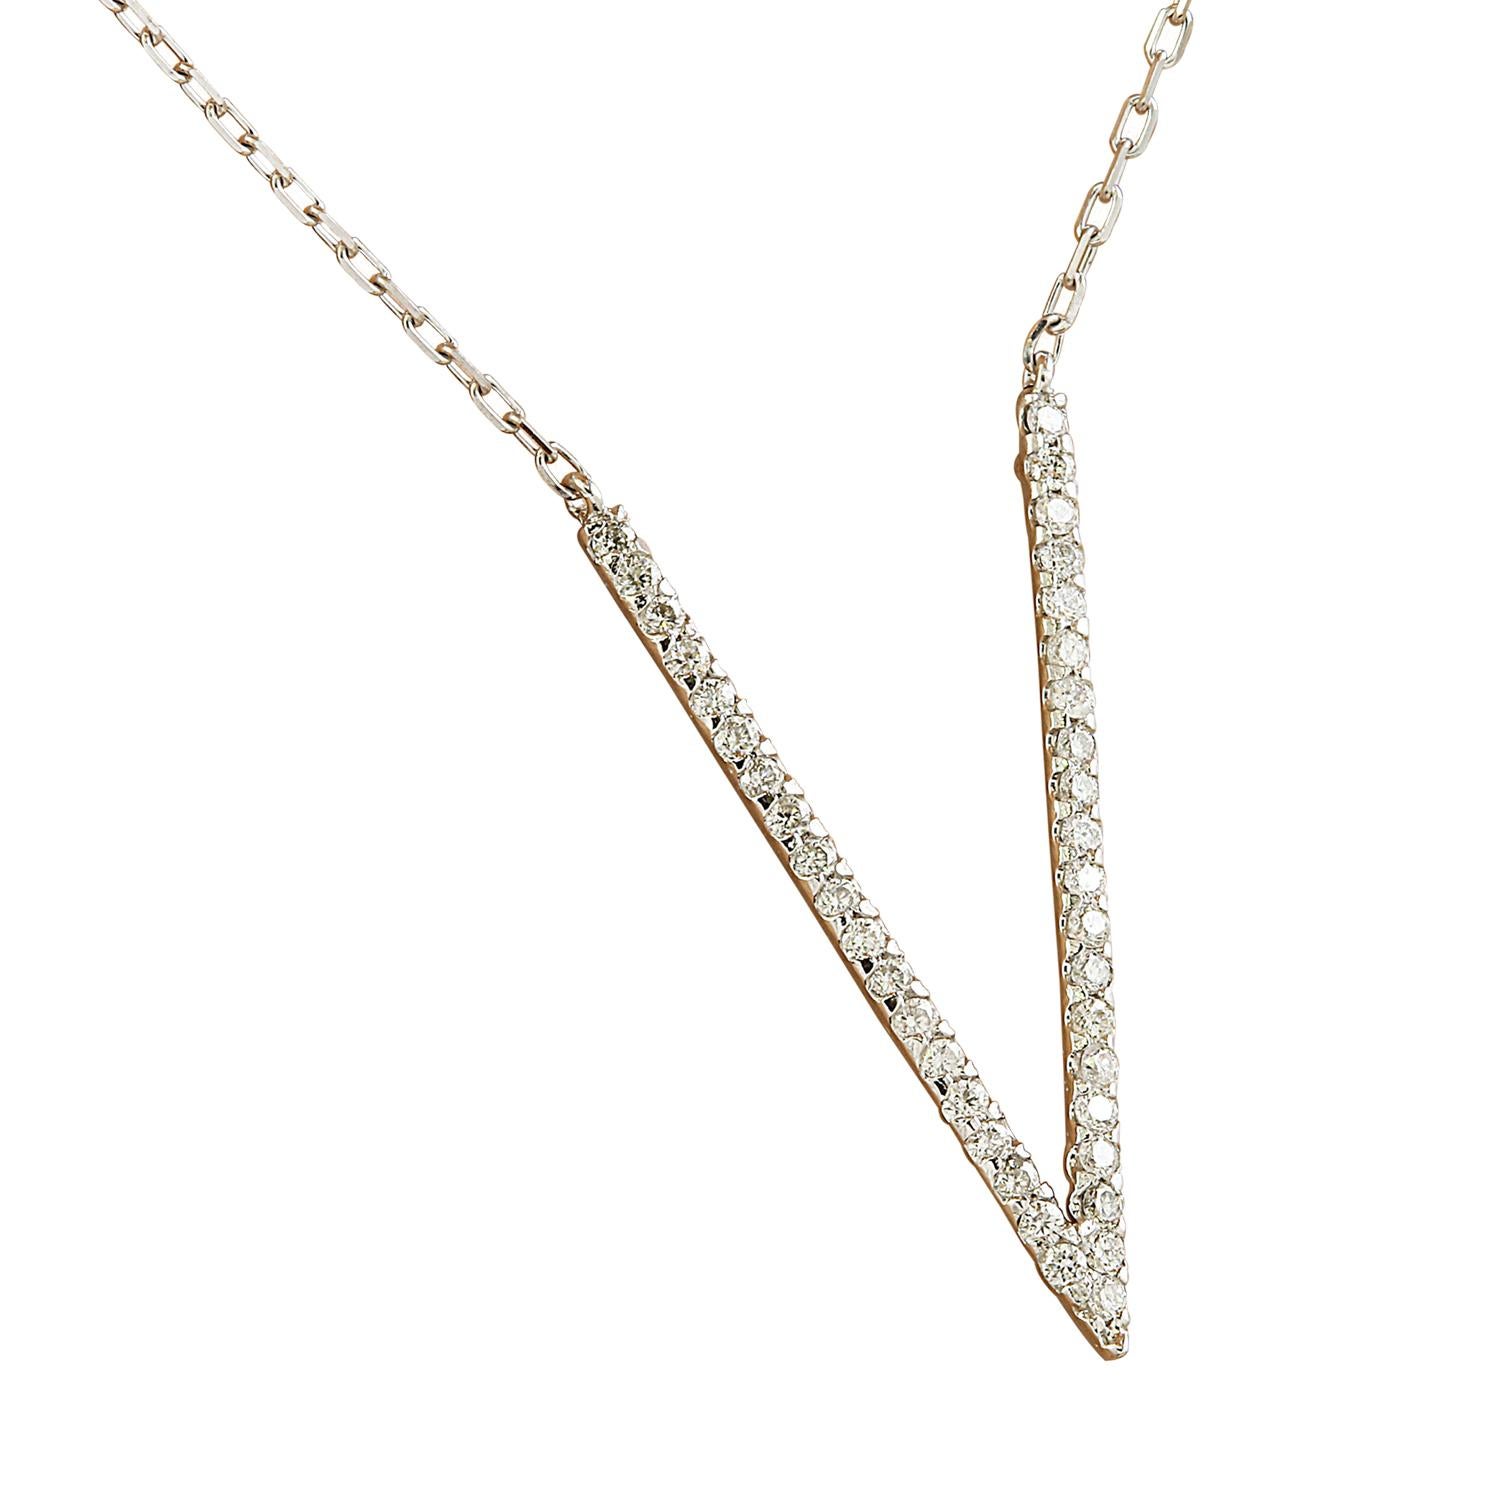 Introducing our exquisite 0.40 Carat Natural Diamond V-shaped necklace, crafted in luxurious 14K Solid White Gold. Stamped for authenticity, this stunning piece weighs 2 grams and boasts a length of 15 inches, perfect for elegant wear. The